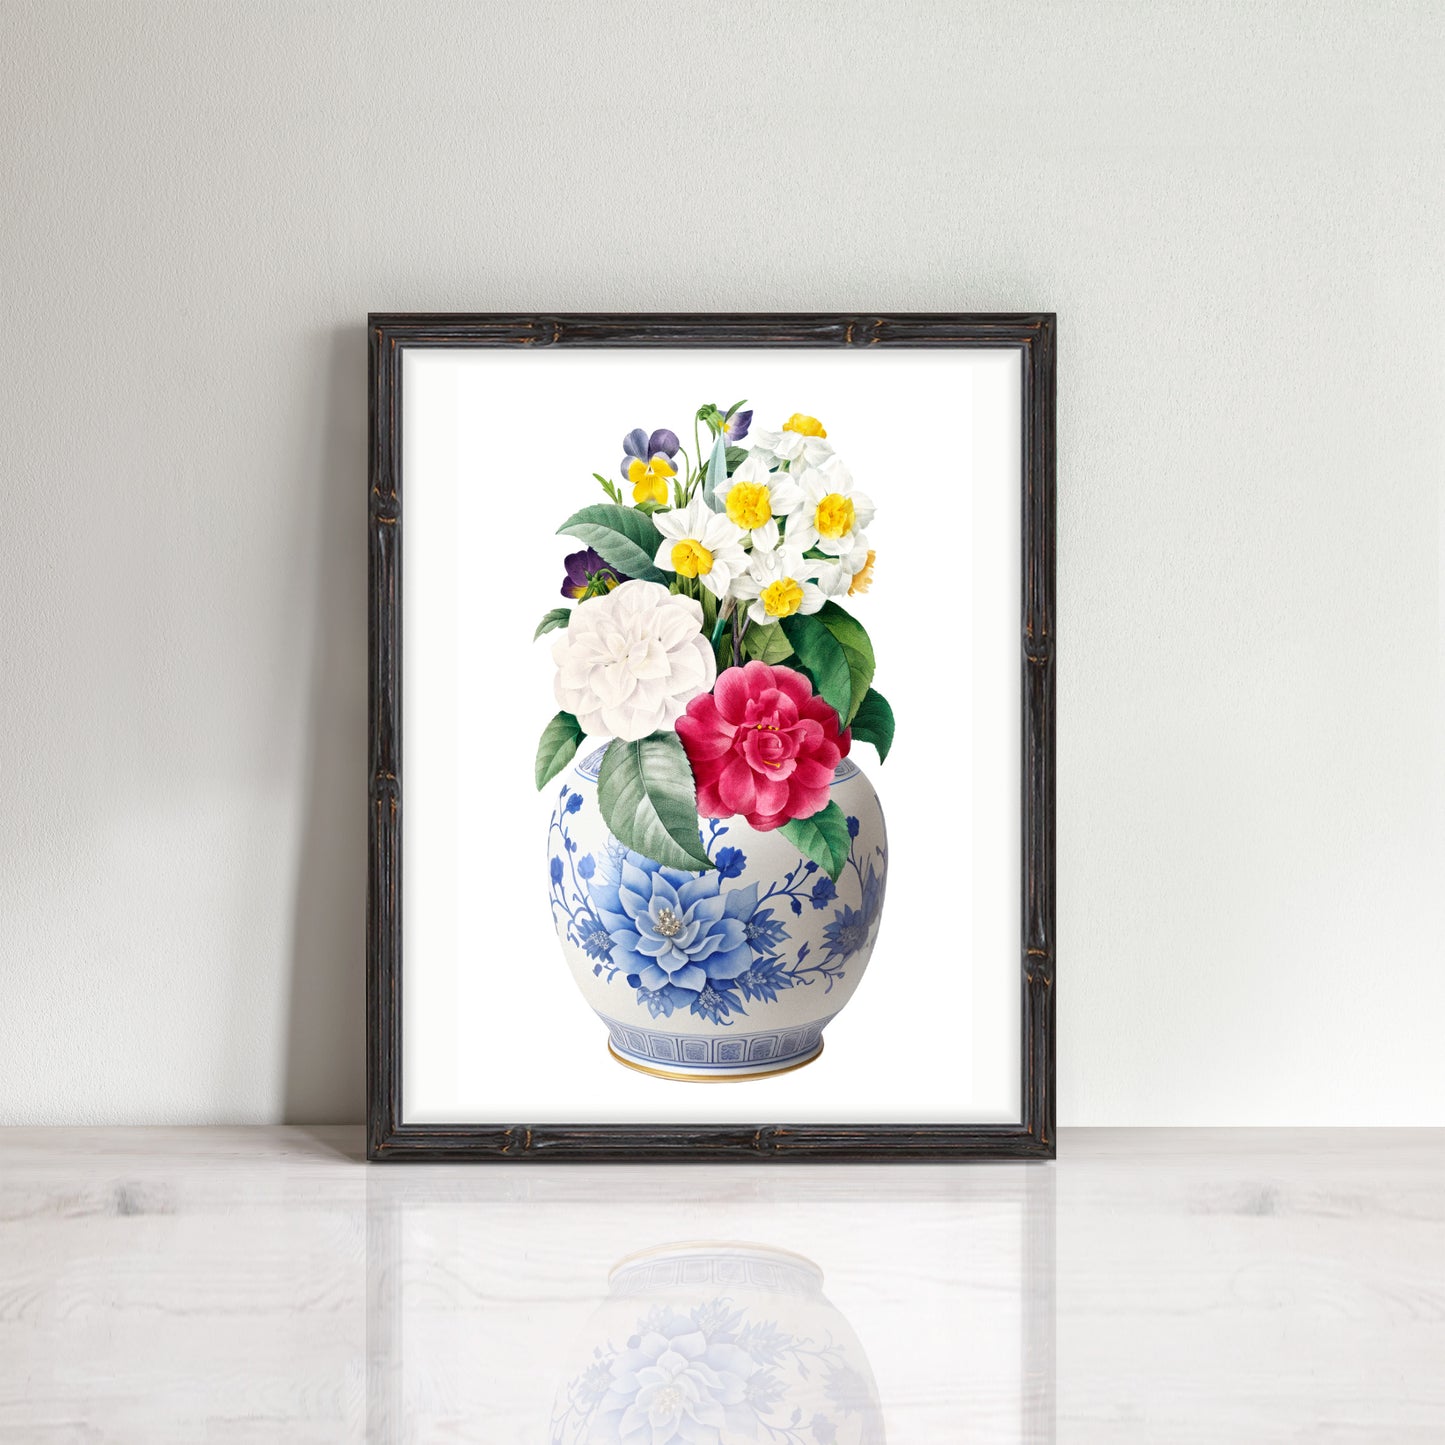 print featuring a vibrant bunch of flowers, camellias, pansies etc  in a classic blue and white china ginger jar